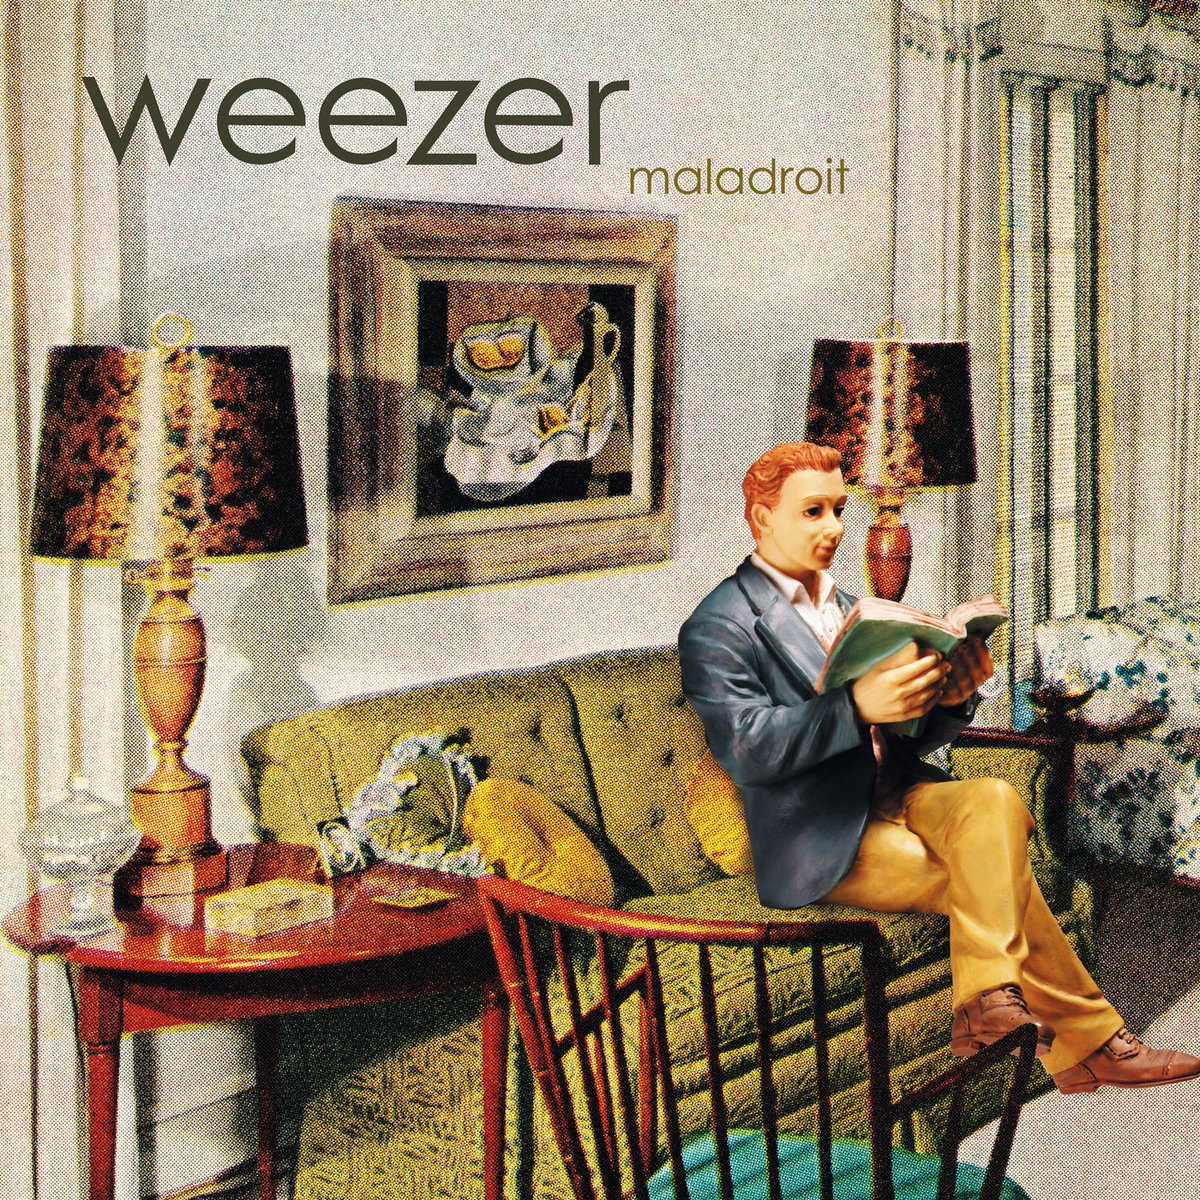 Another musical mystery lies within Maladroid by Weezer. So many musical mysteries, so little time!!!
🤔🔎
#MusicalMystery